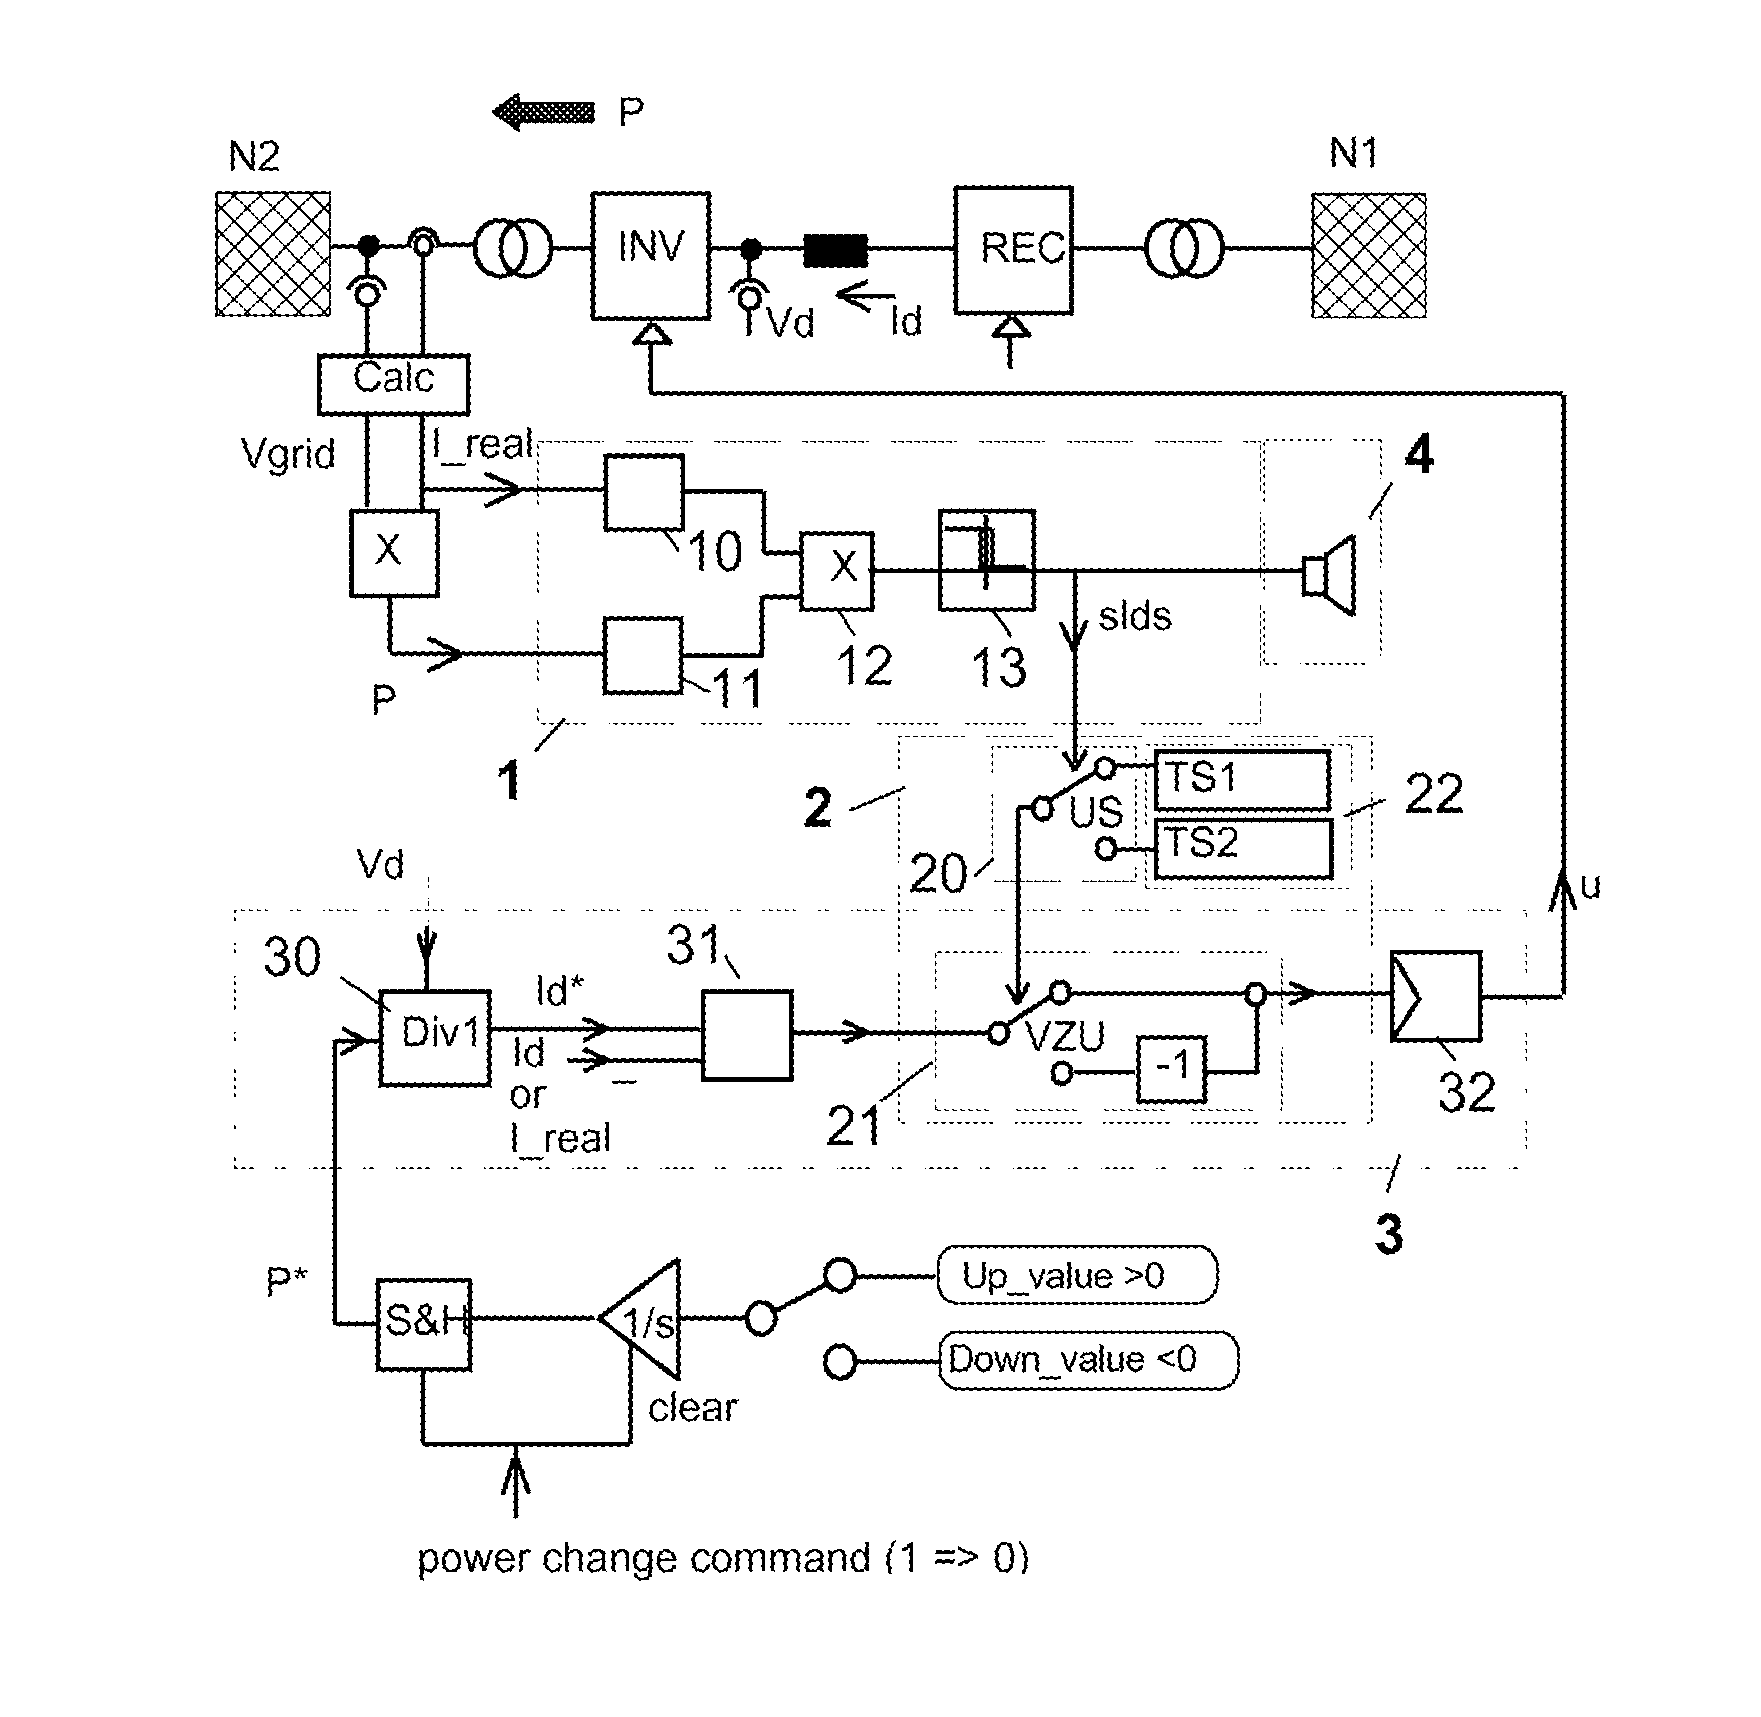 Method and apparatus for automatic network stabilization in electric power supply systems using at least one converter